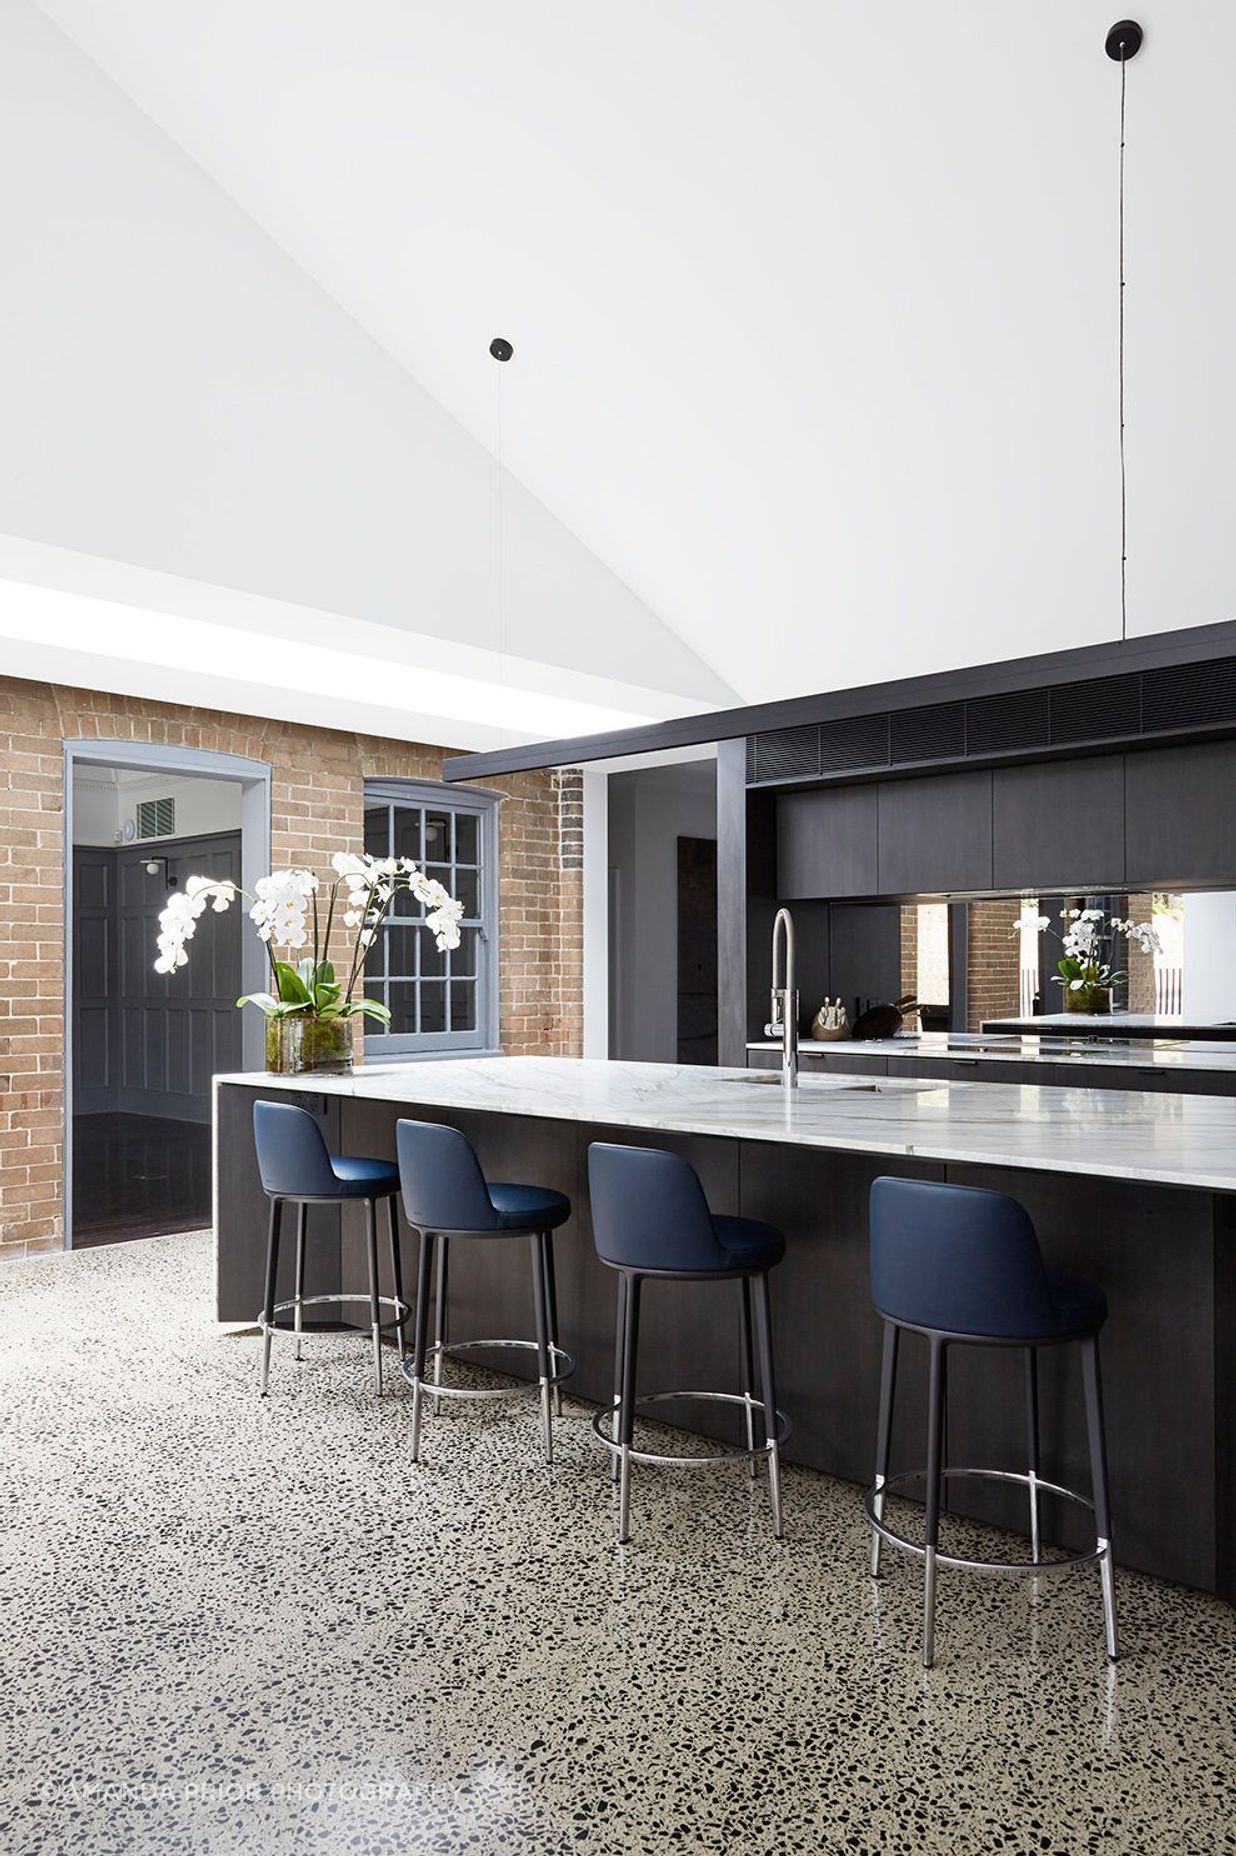 The kitchen features dramatic dark cabinetry that contrasts against the stone benchtop.